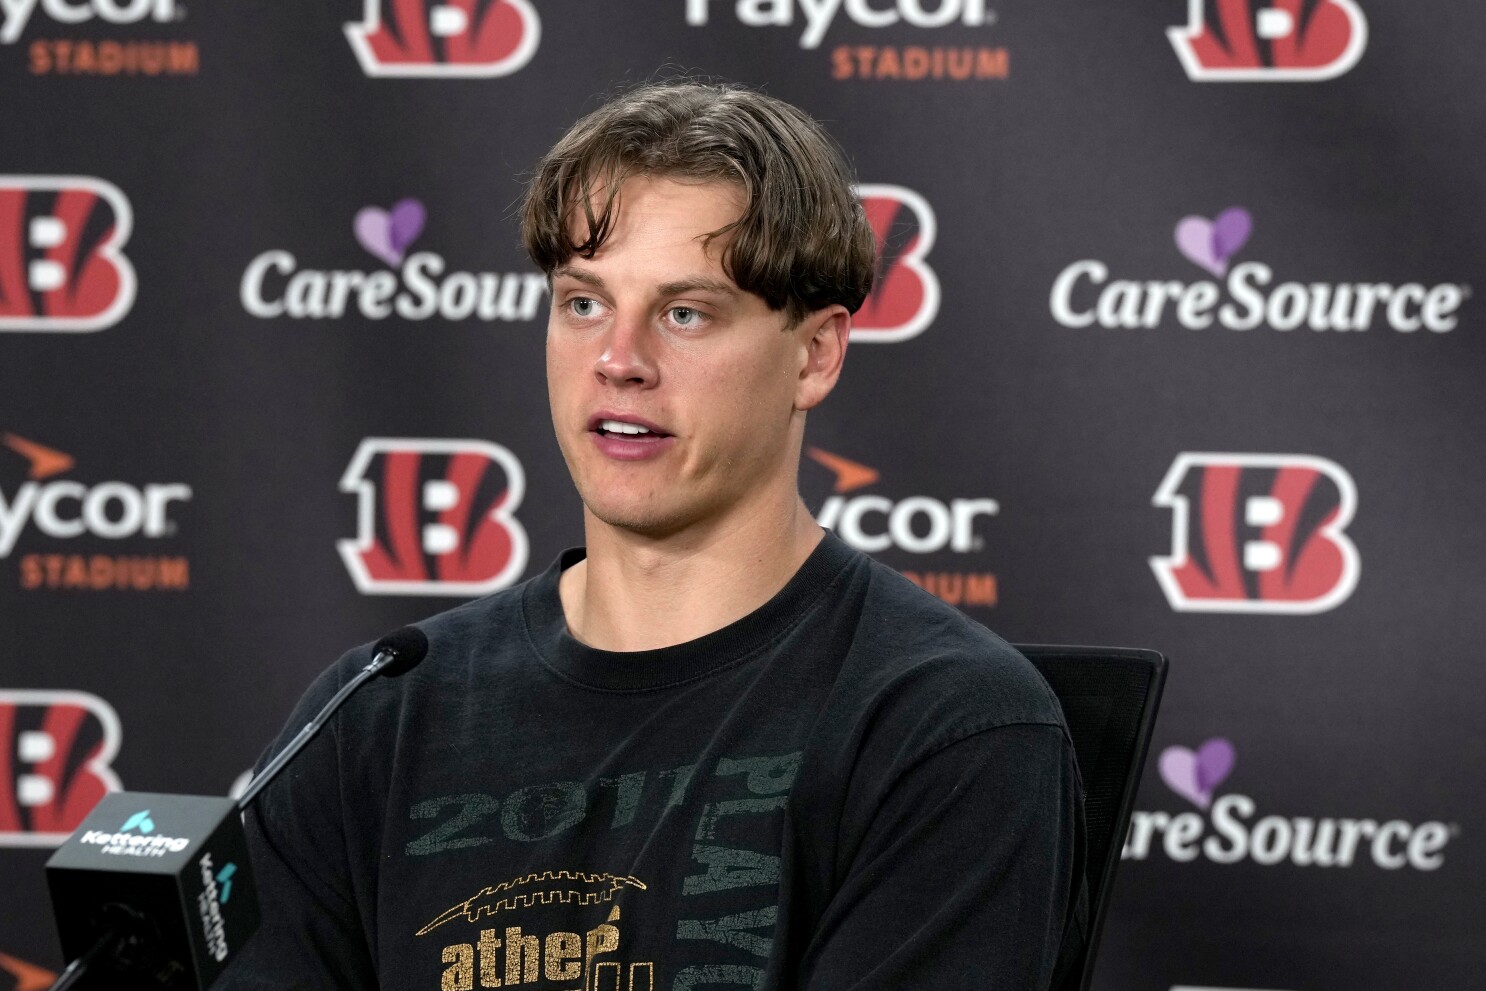 Joe Burrow reports to Bengals training camp as contract talks